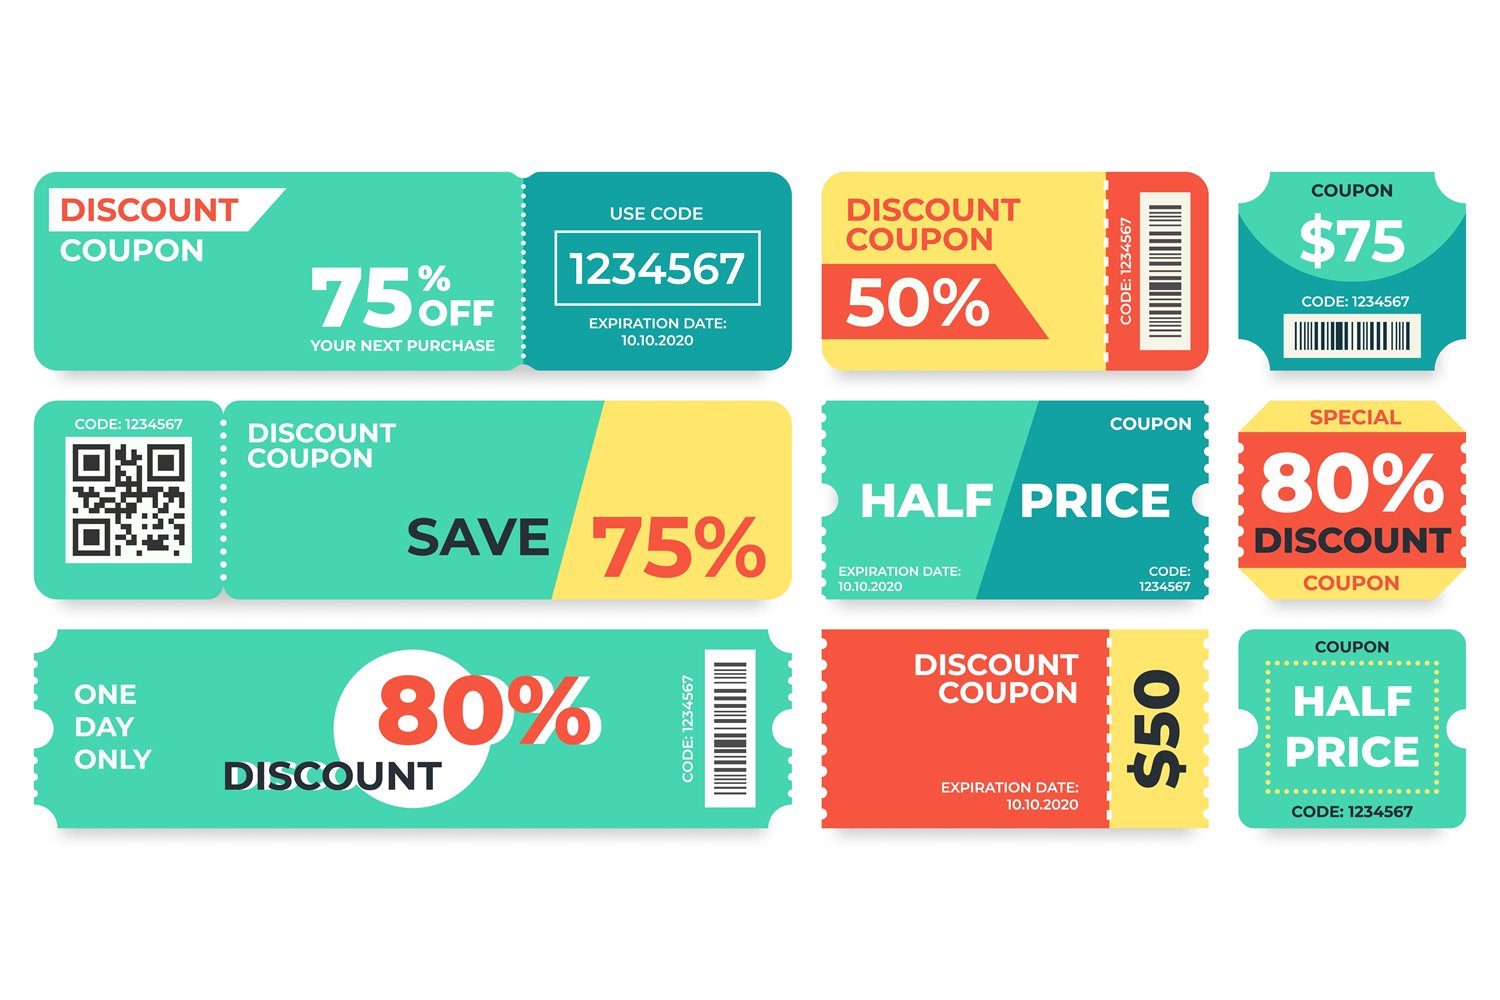 Discount Code Reliability Study: Which is the Latest Coupon Site?